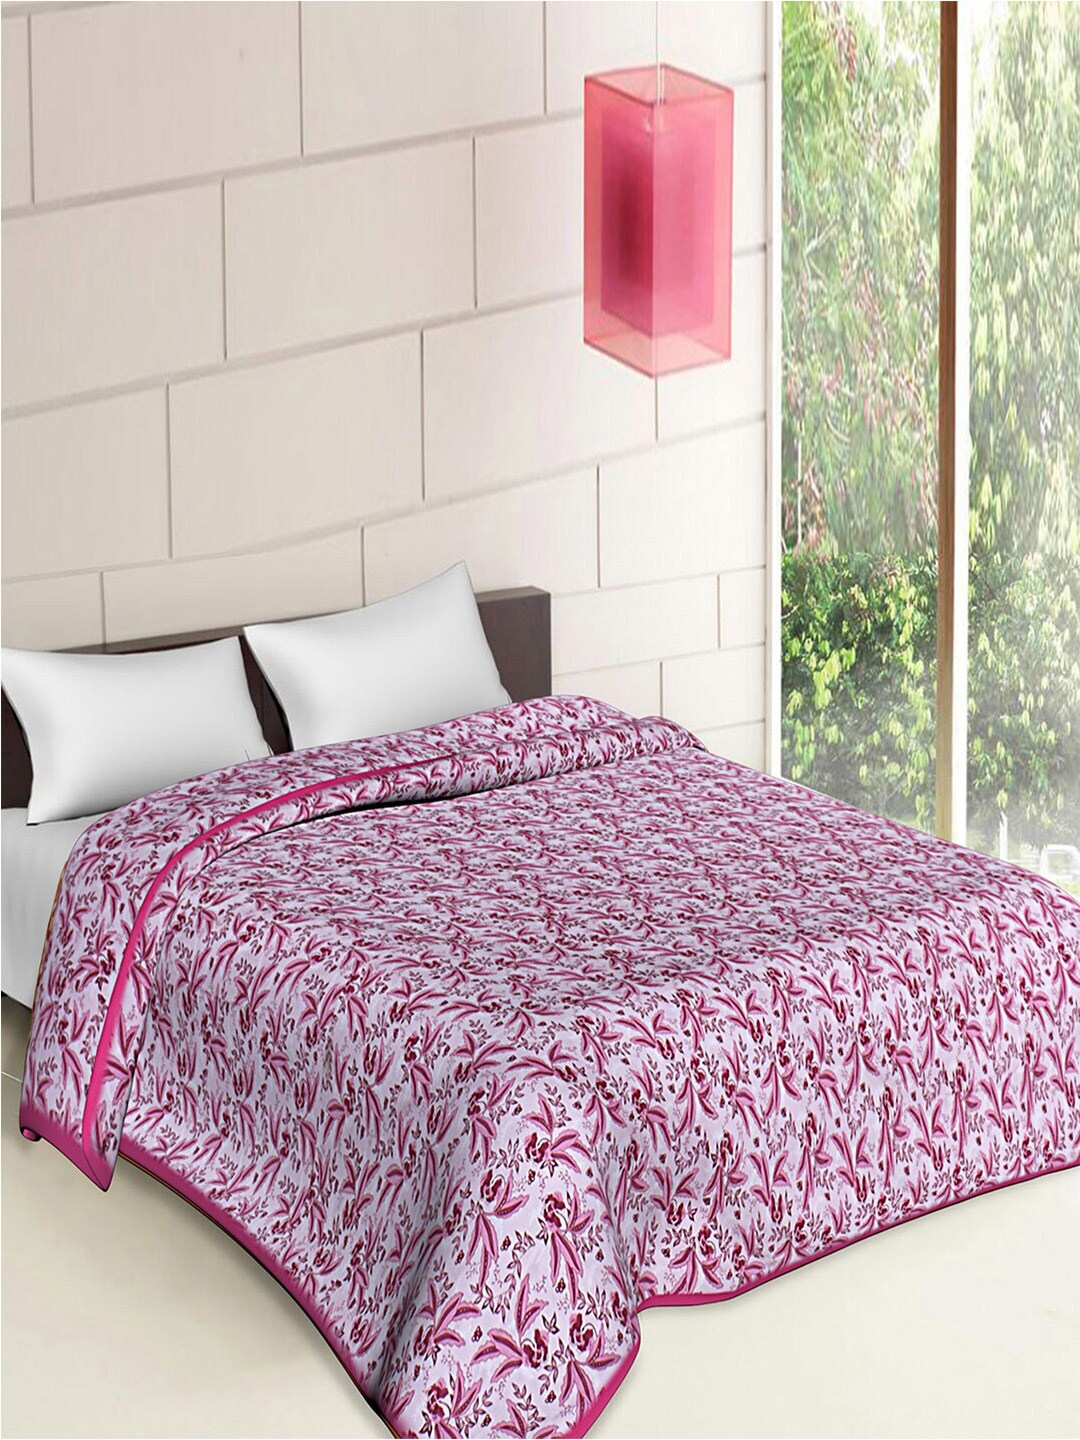 Kuber Industries Pink & Grey Floral AC Room 300 GSM Double Bed Blanket Price in India